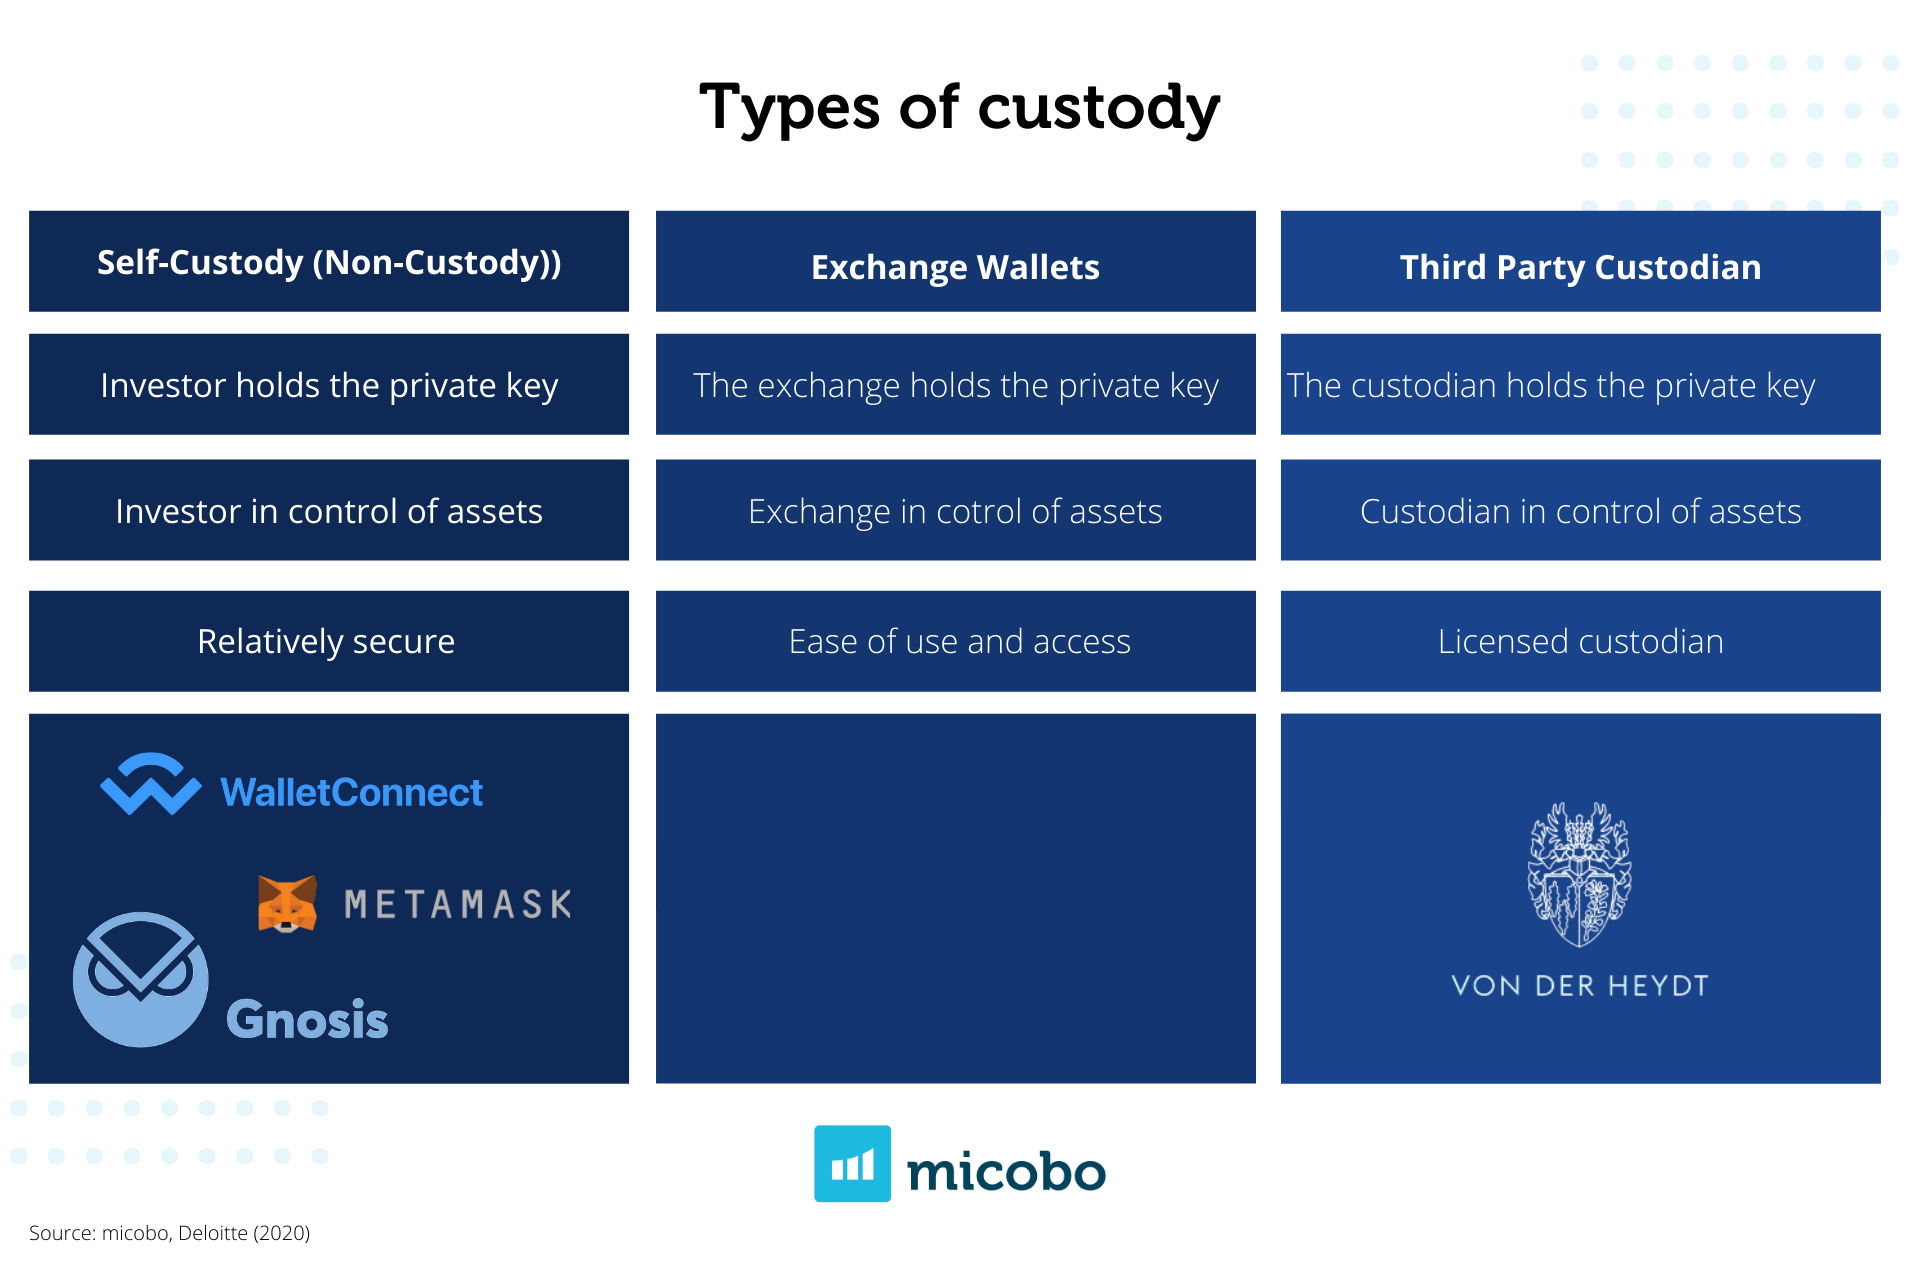 Types of custody and micobo’s integration examples. 